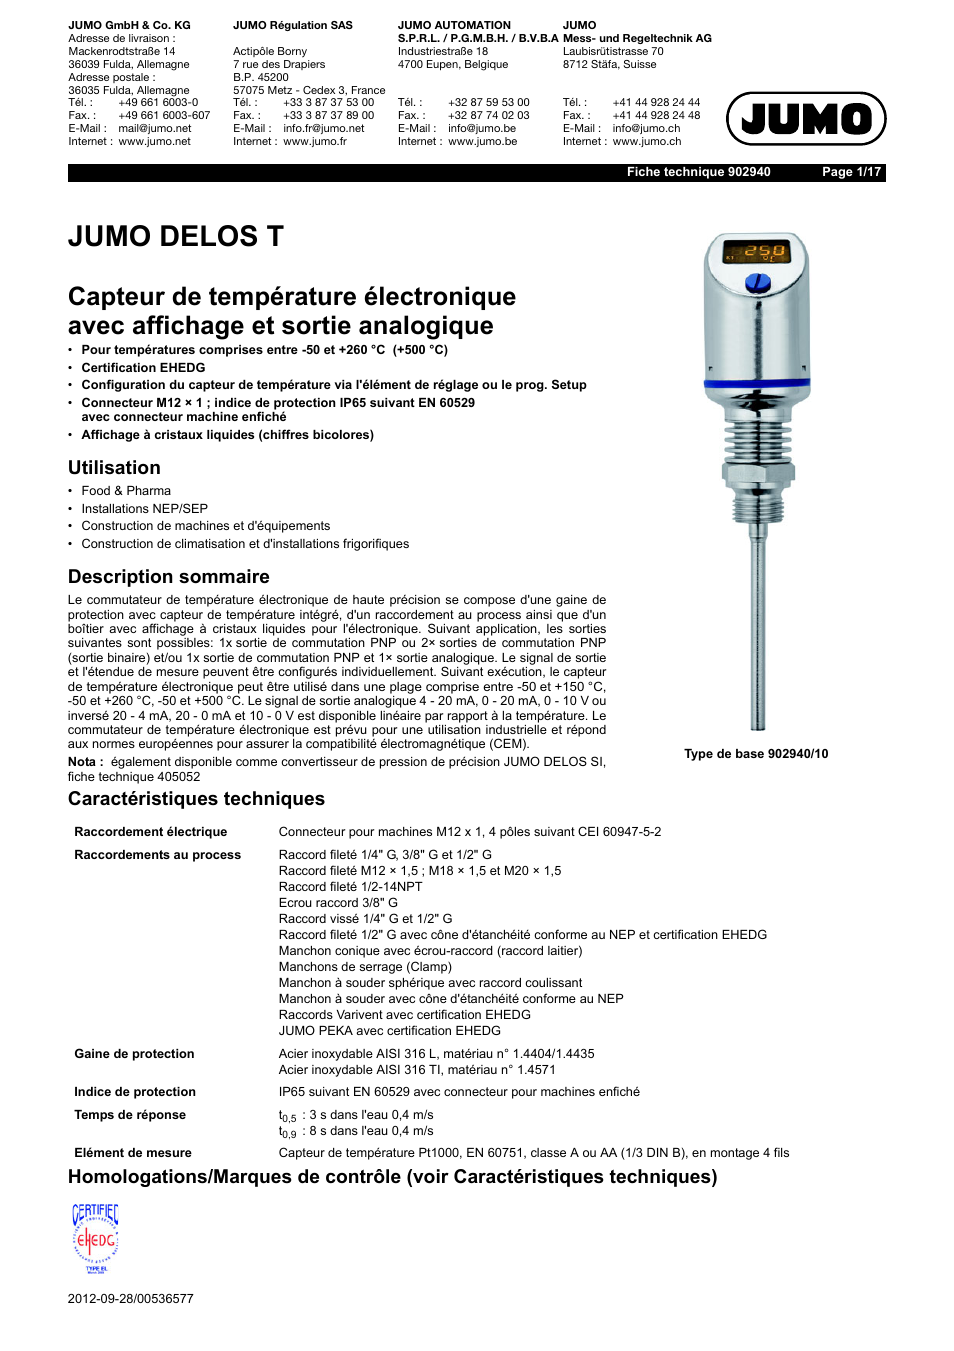 Jumo Delos T Electronic Temperature Switch With Display And Analog Output Data Sheet Manuel D Utilisation Pages 17 Mode Original